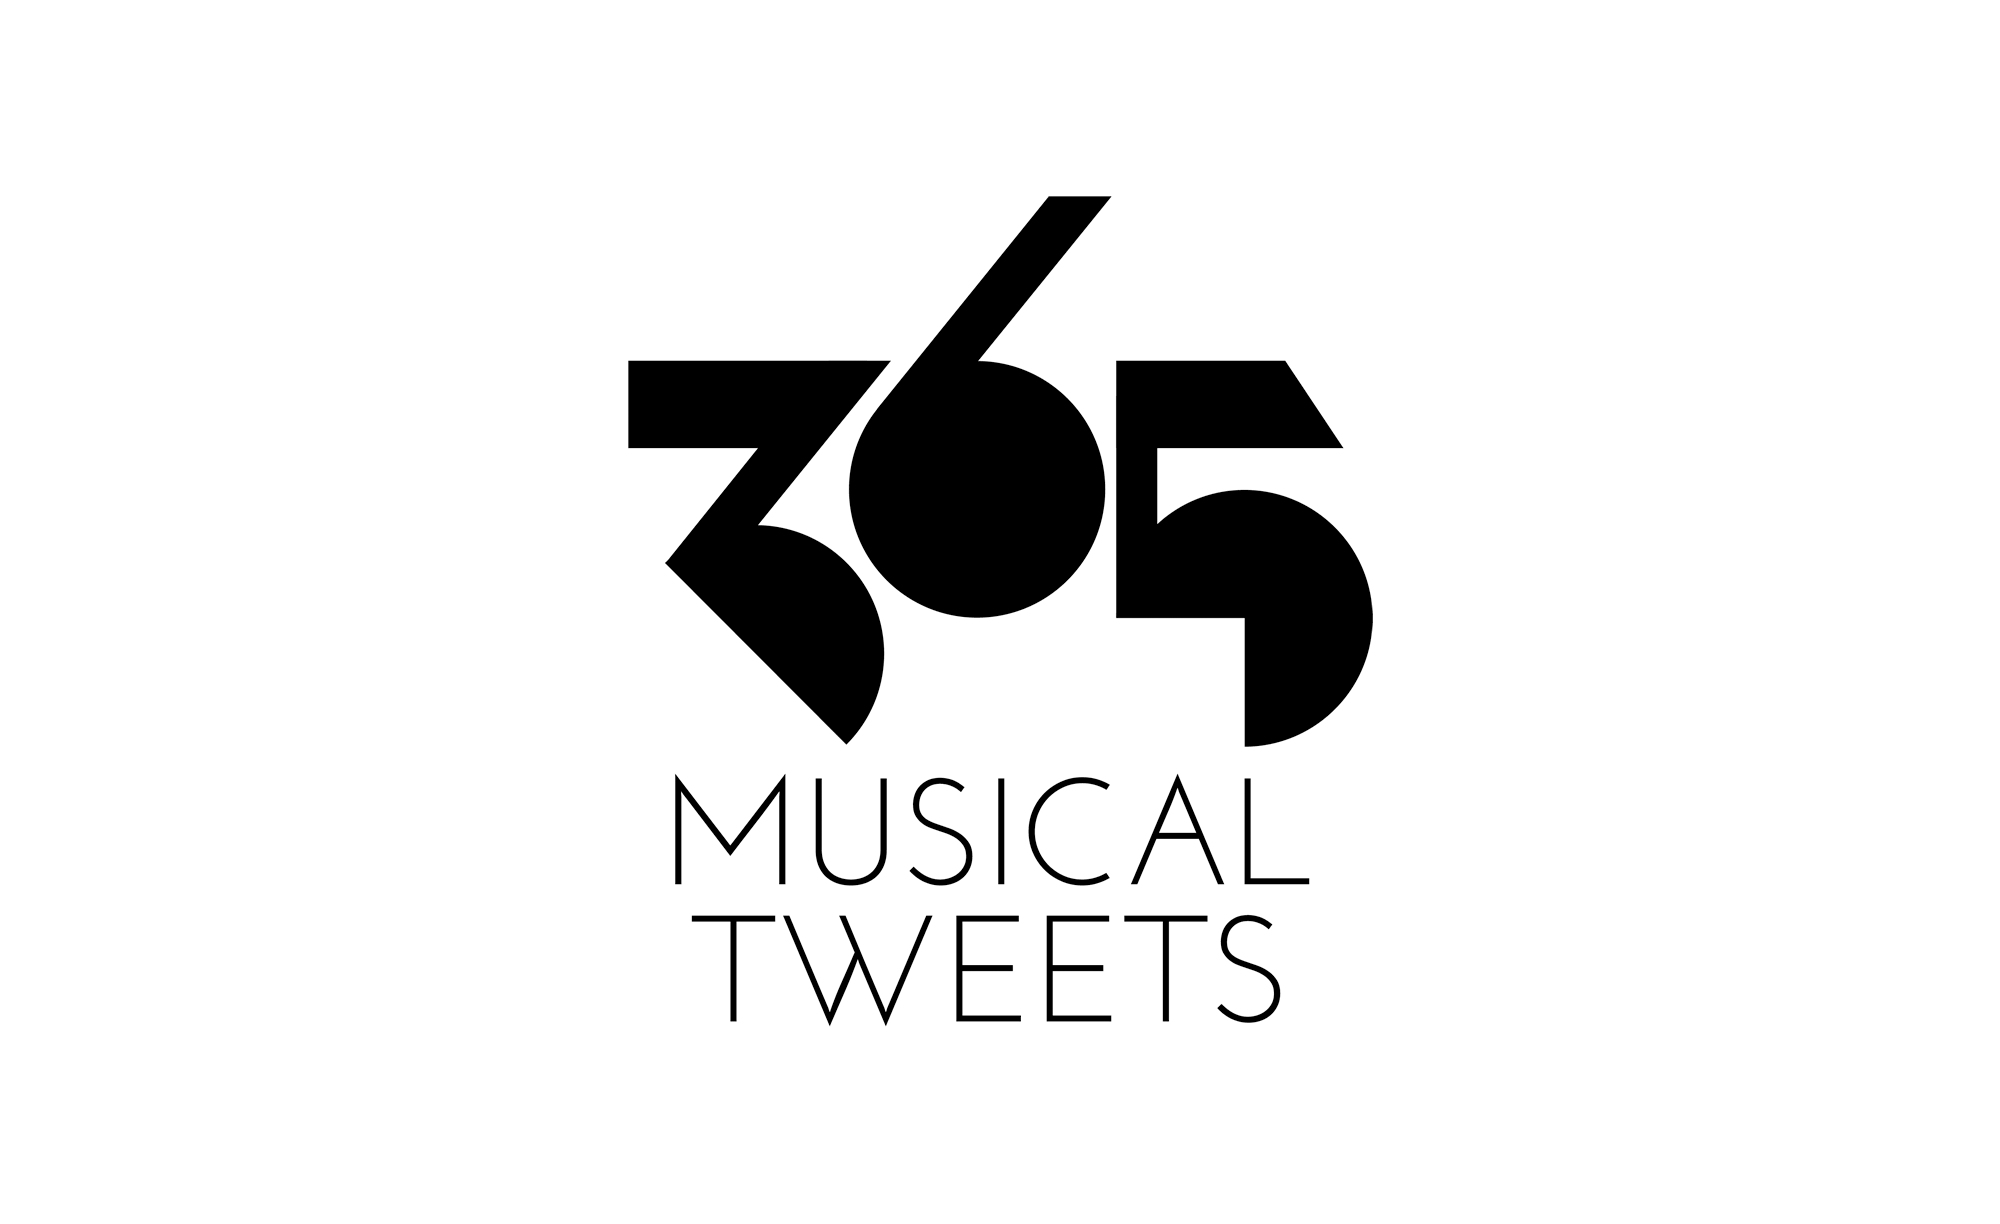 365 Musical Tweets — Mikel Chamizo